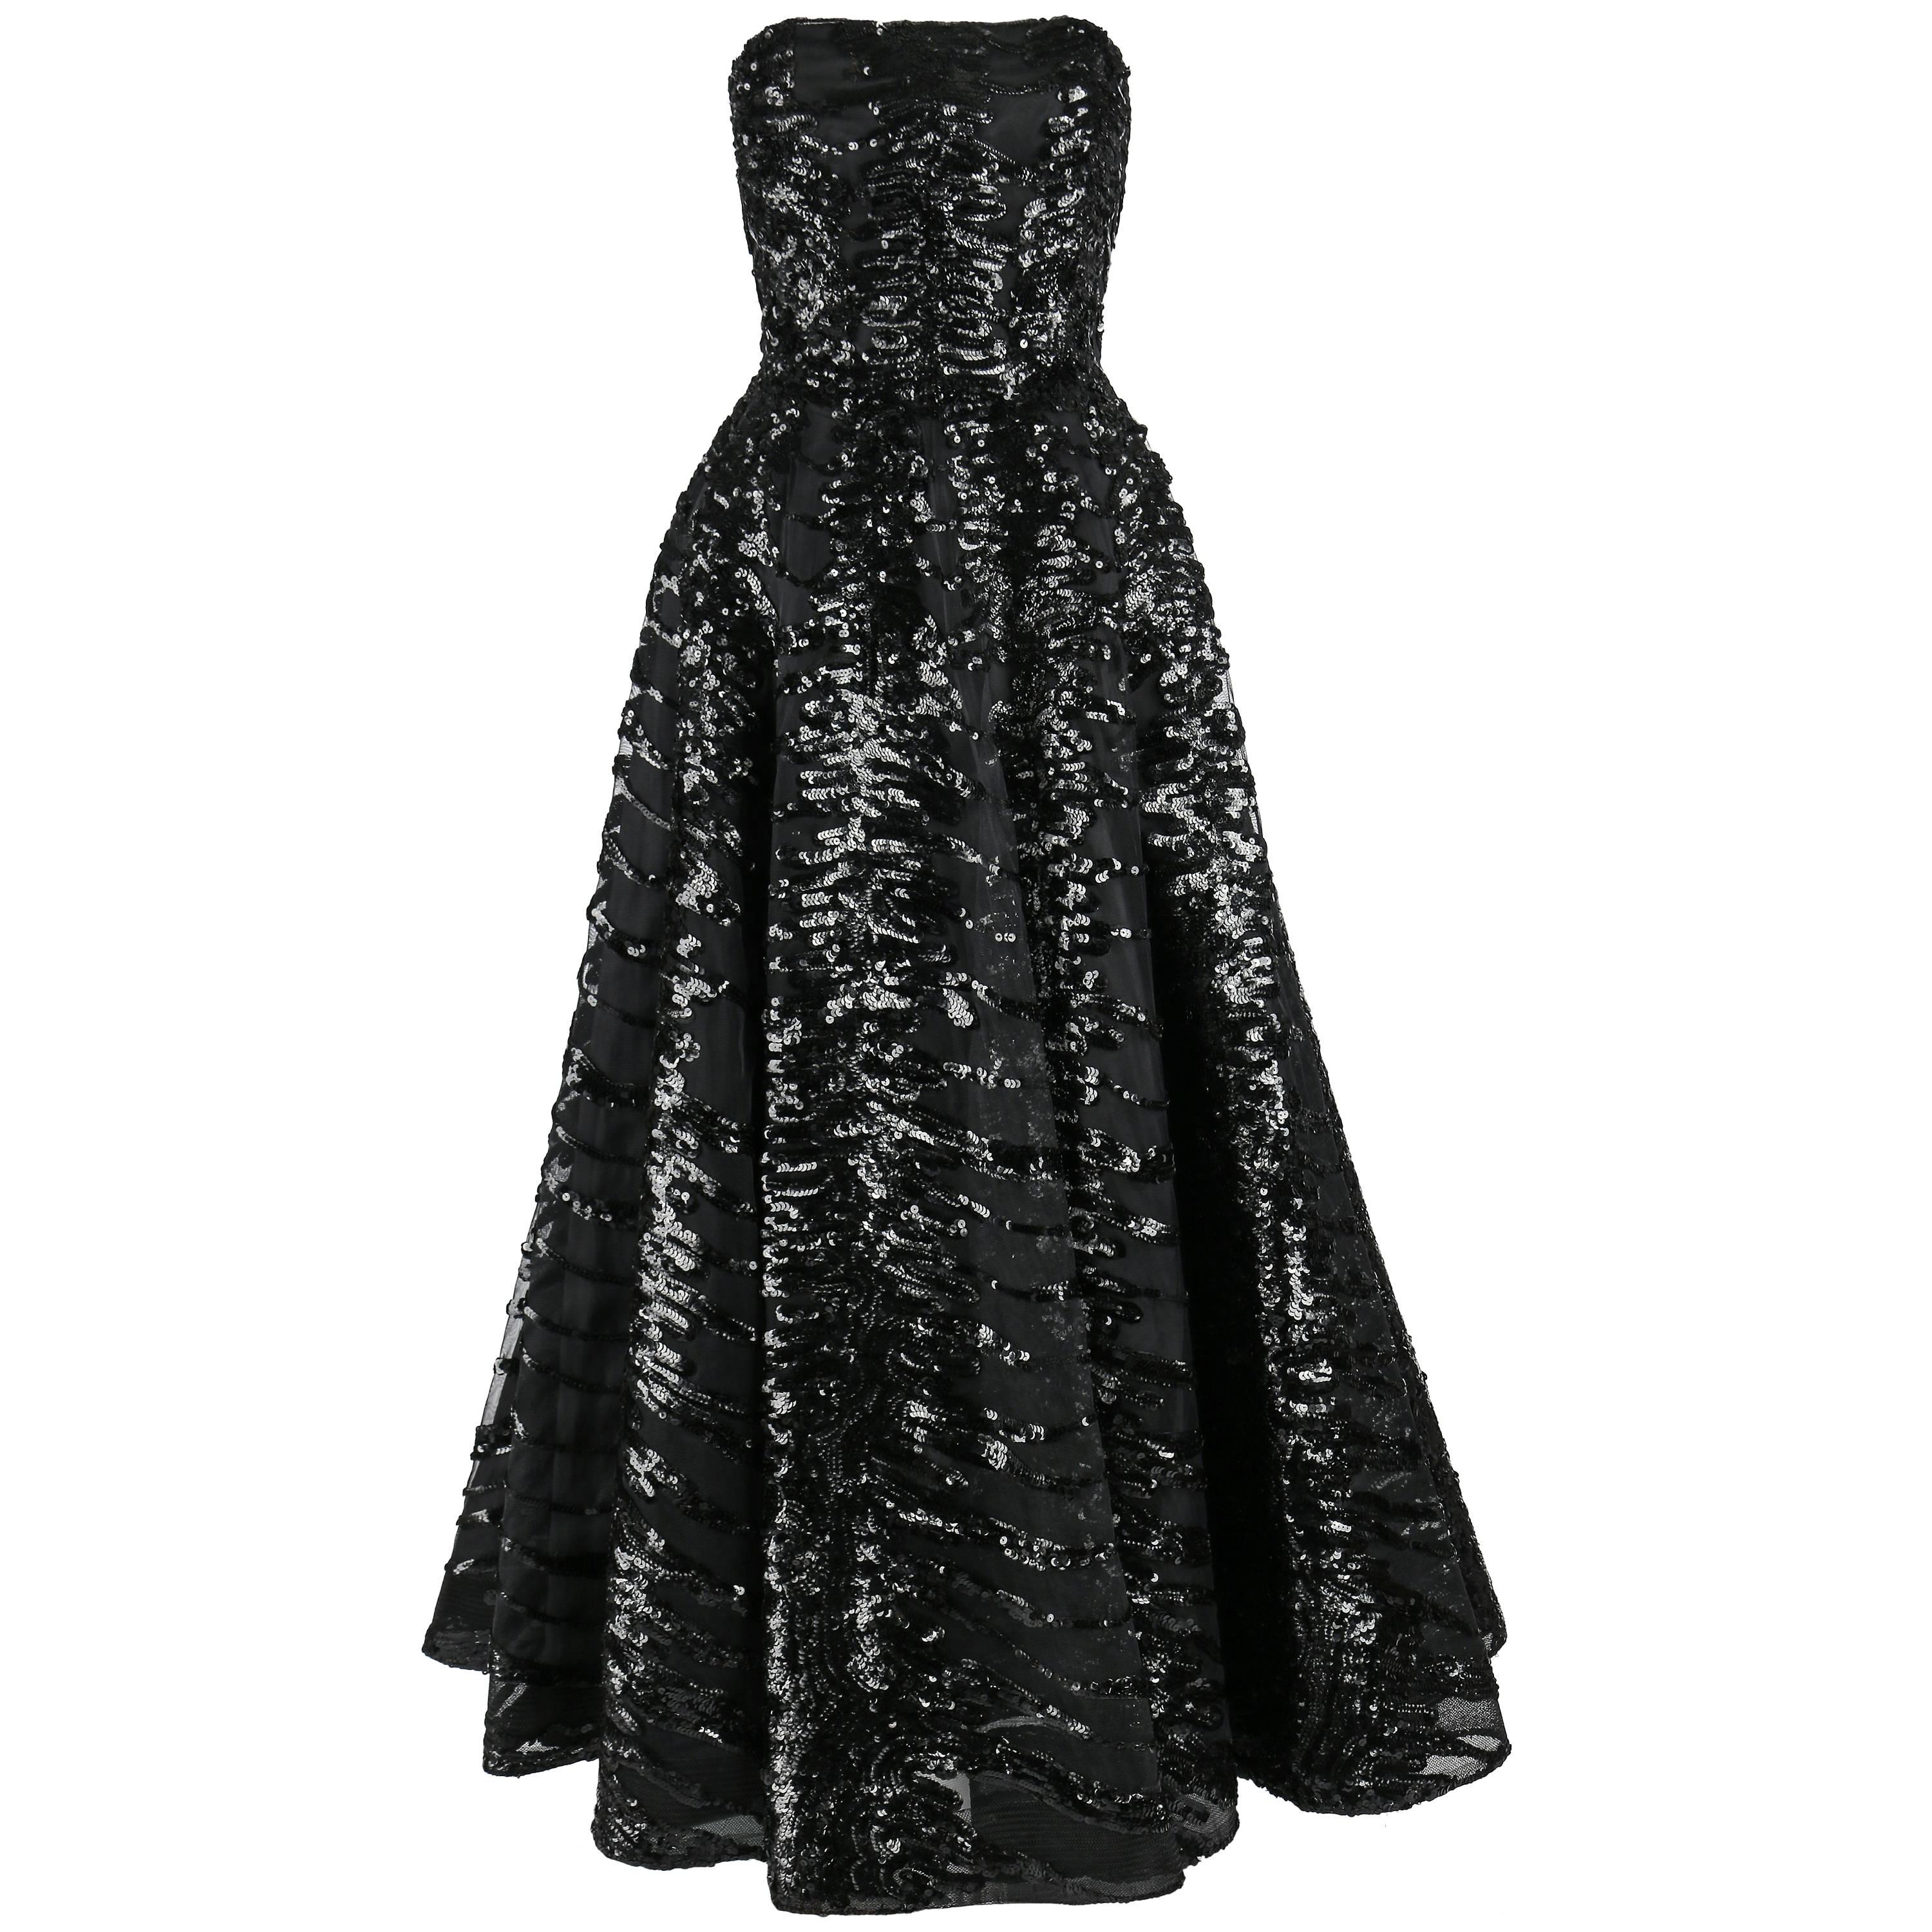 HAUTE COUTURE 1950s Black Sequin Ball Gown Evening Theater Opera Party Dress For Sale